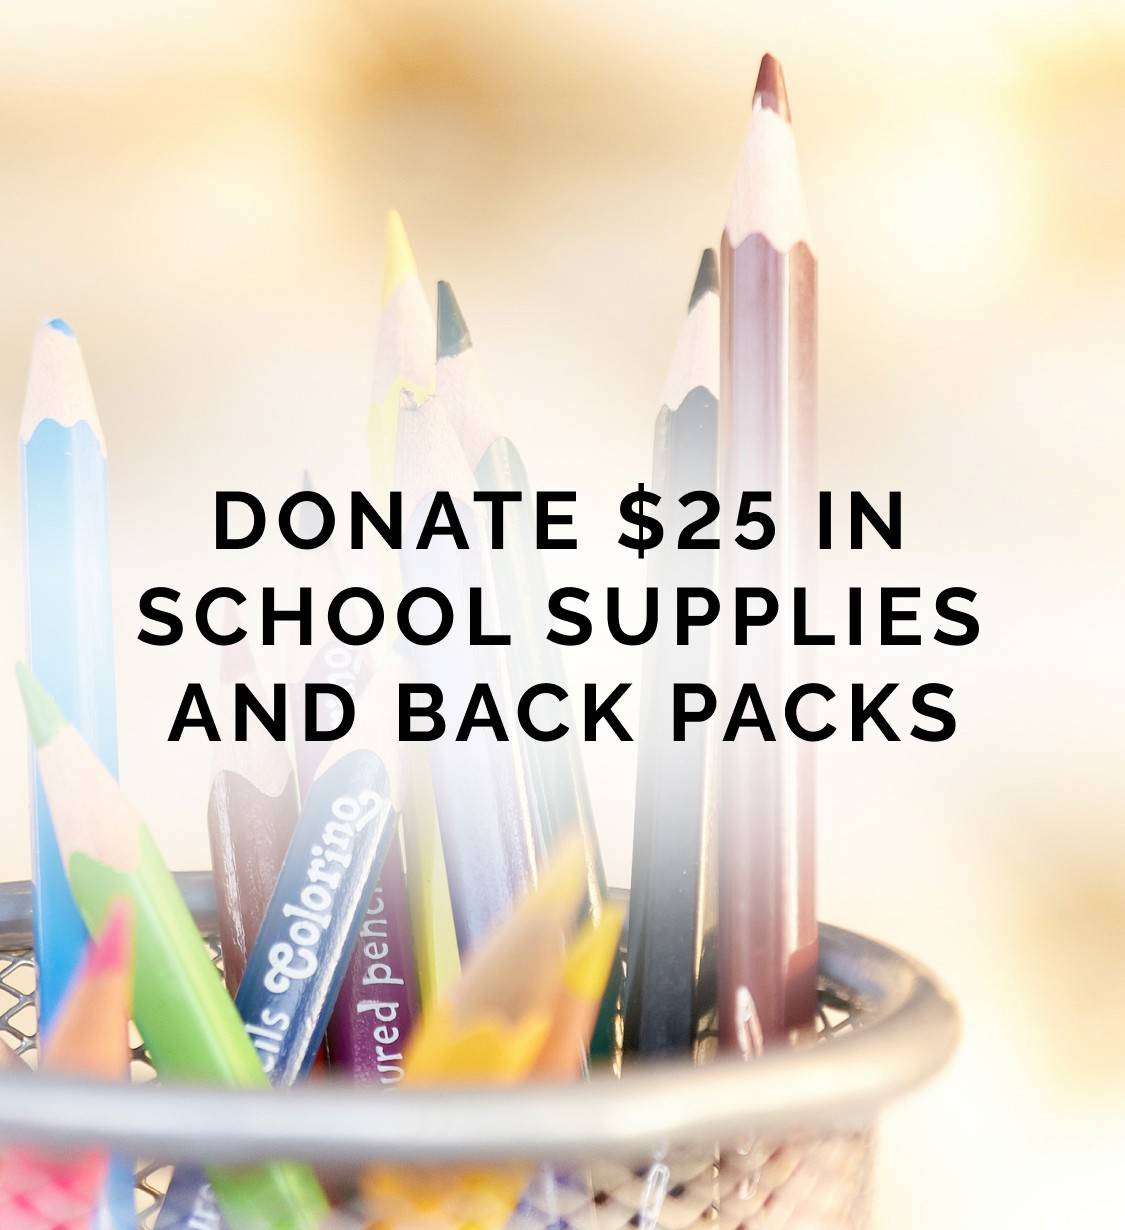 Donate $25 In School Supplies And Back Packs